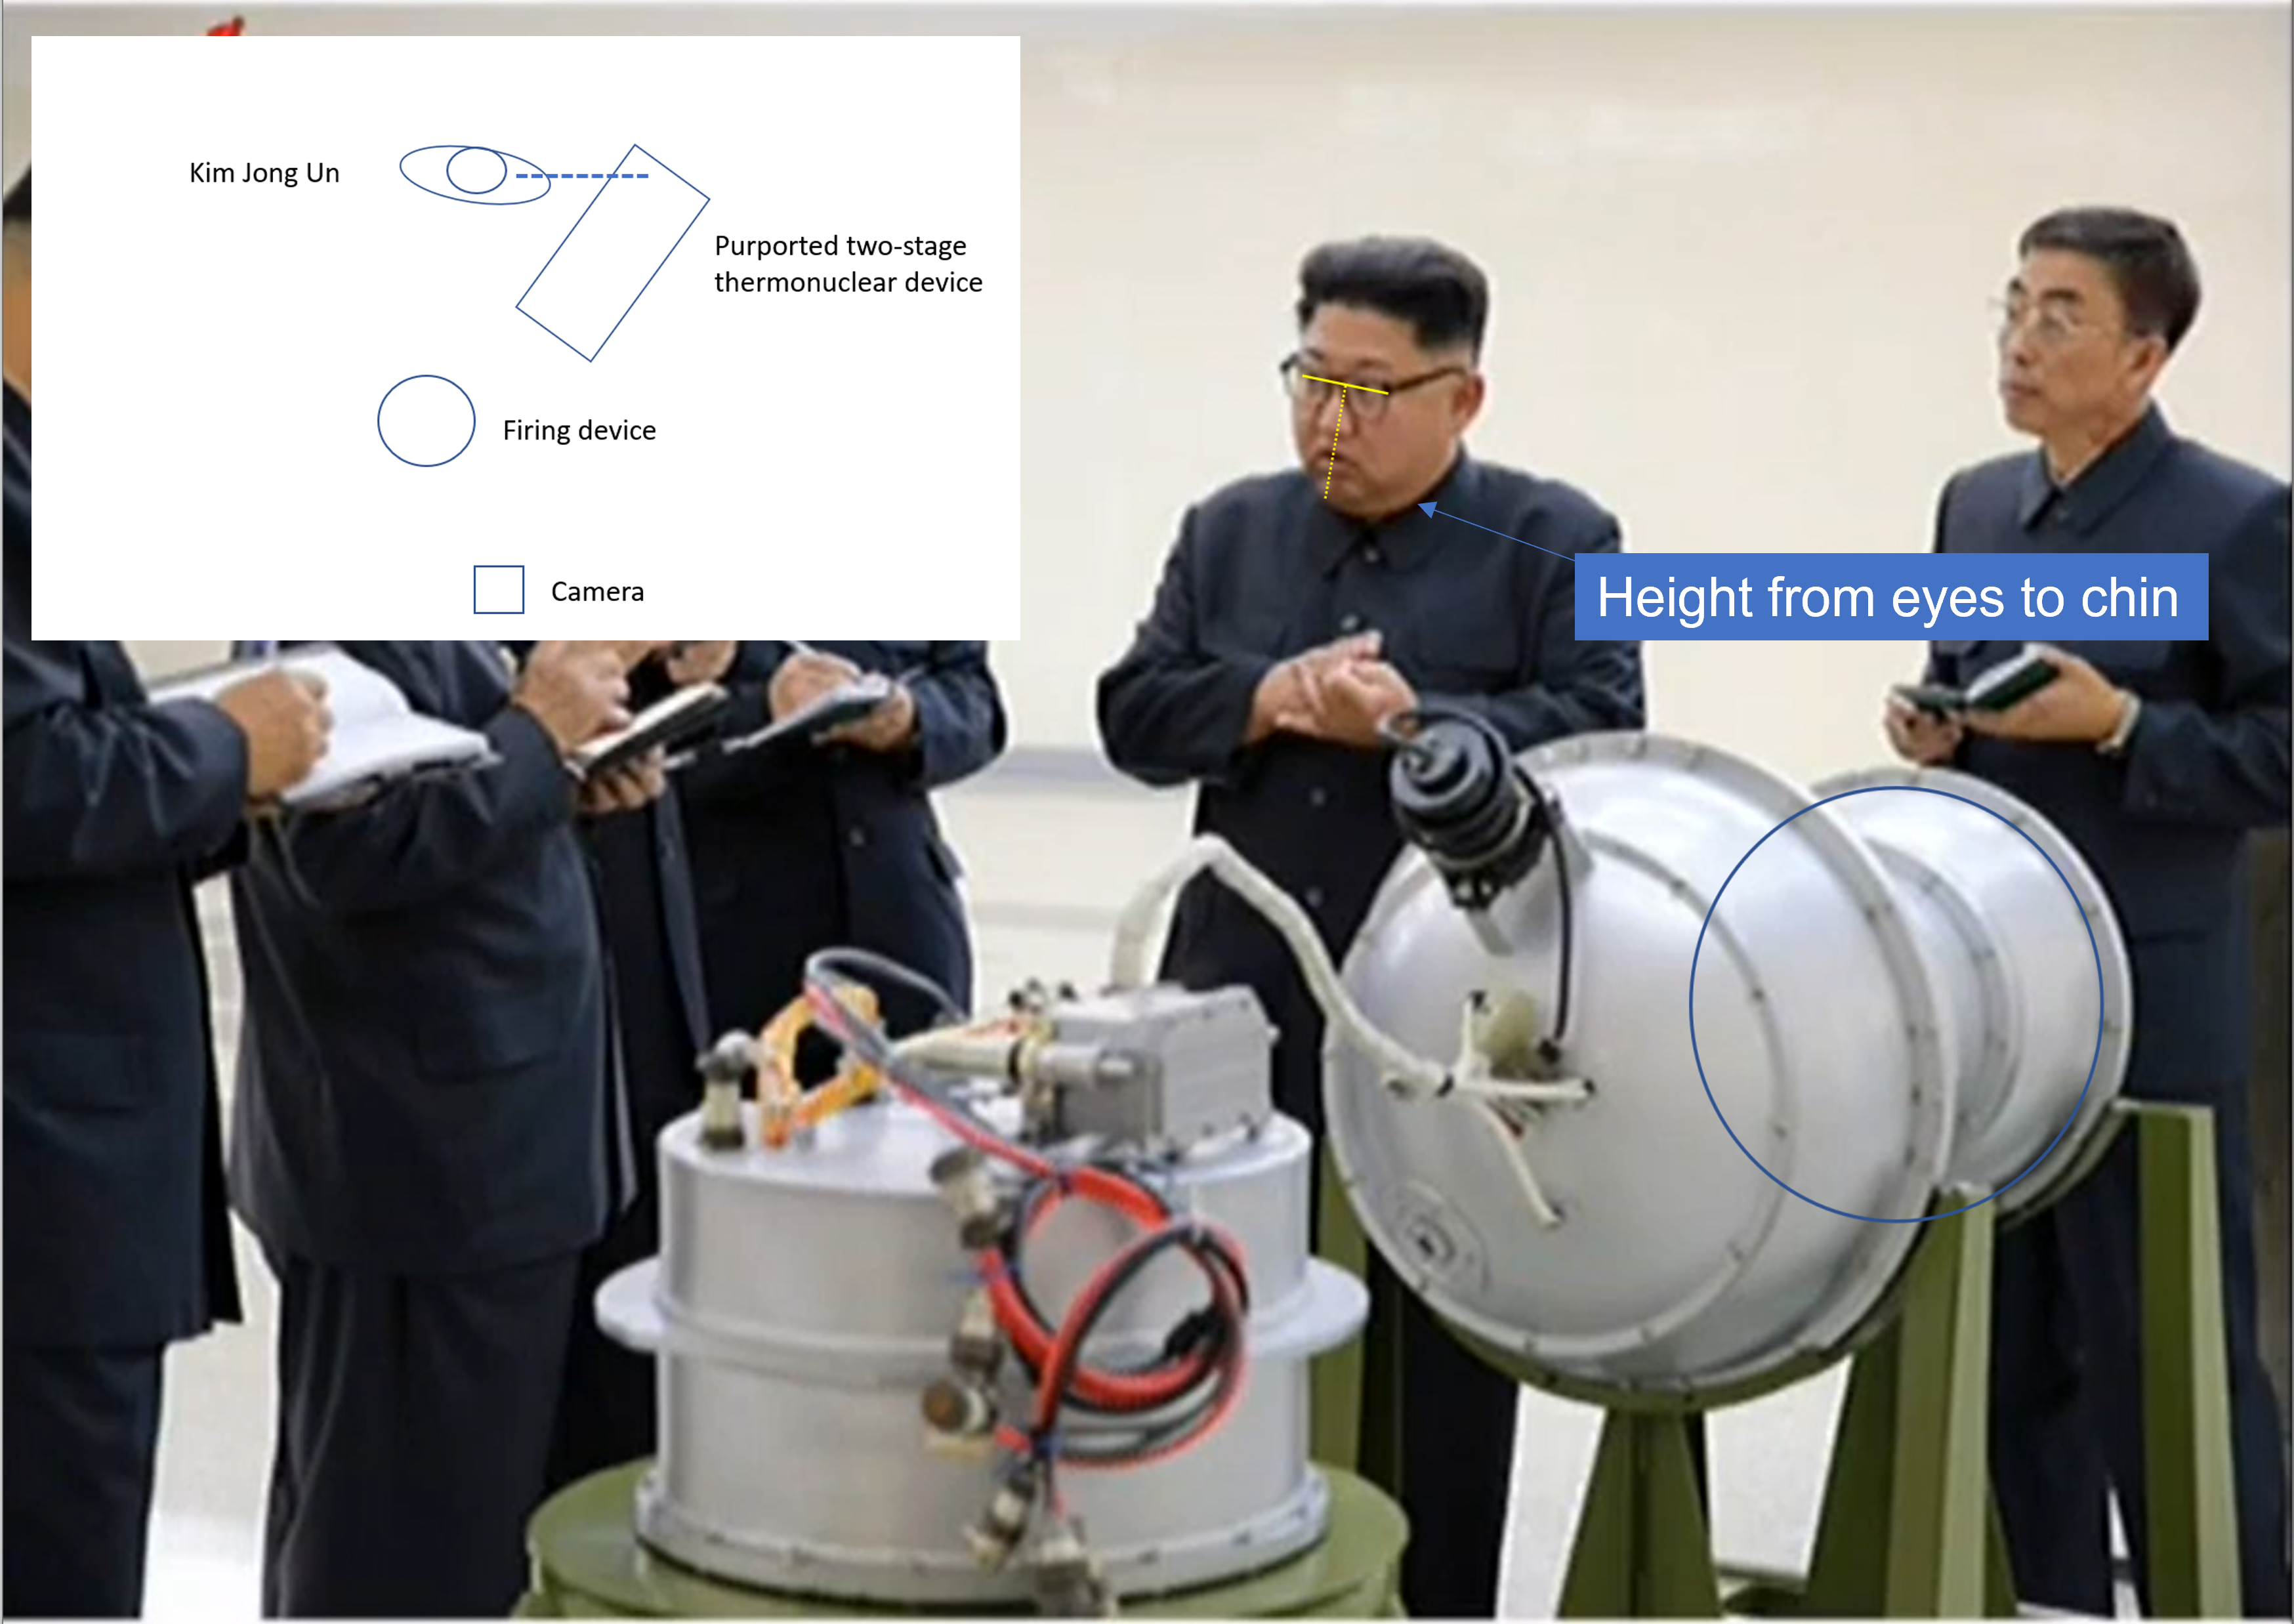 Figure 10. Measuring diameter of secondary of purported two-stage thermonuclear device with face length of Kim Jong Un as reference measured in two different images (Figure 4 and Figure 9). The inset image shows the approximate spatial relationship of the photo setting. Image: KCTV